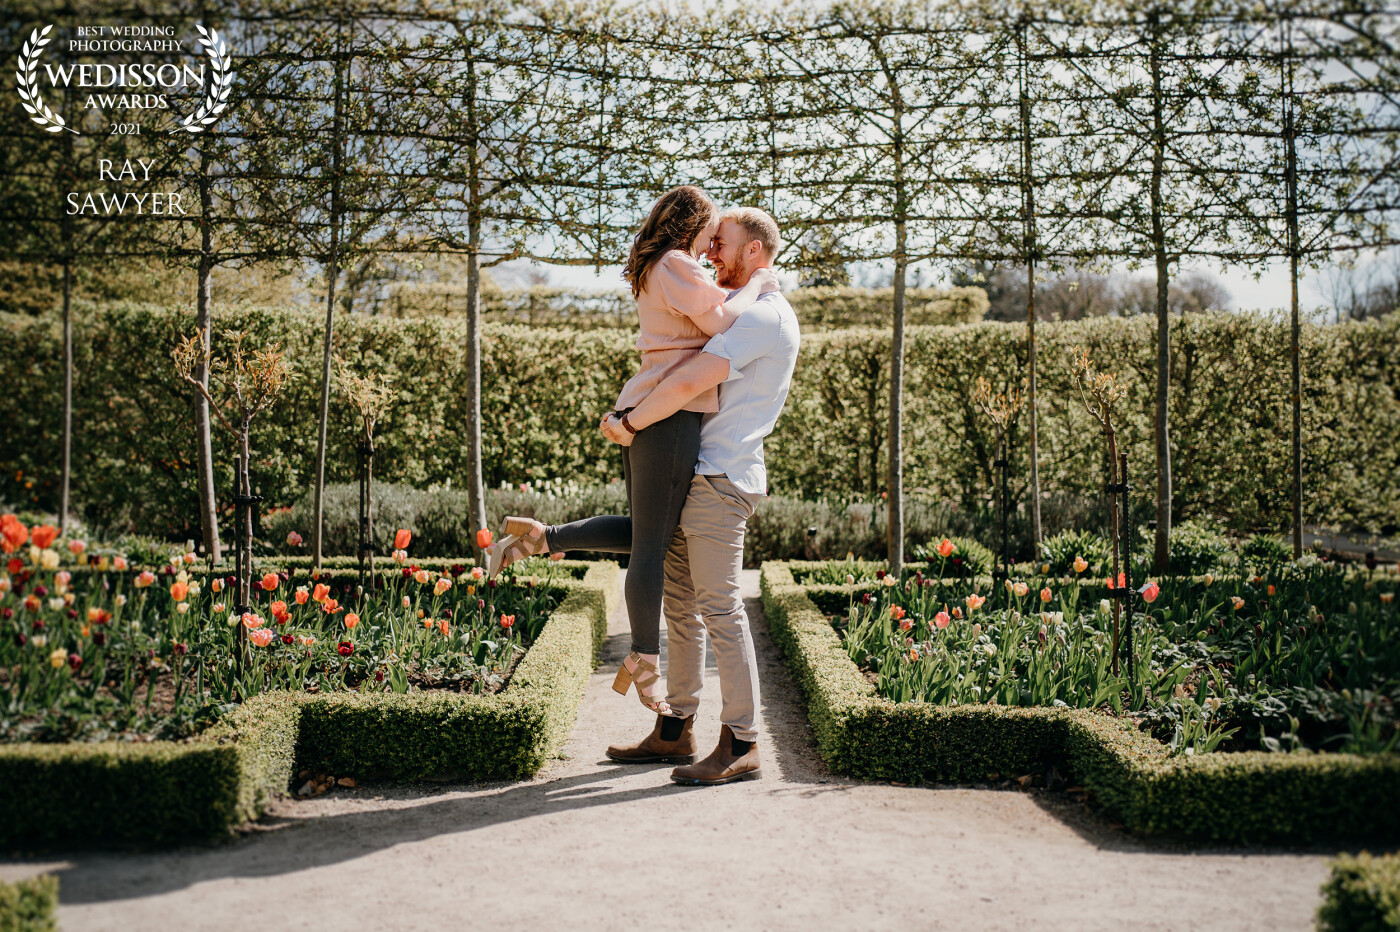 Captured at a recent Pre-Wedding shoot at Alnwick Gardens on a red hot day. It honestly looks like the south of France when it's a hot day. Loved this shoot and the couple were ace.